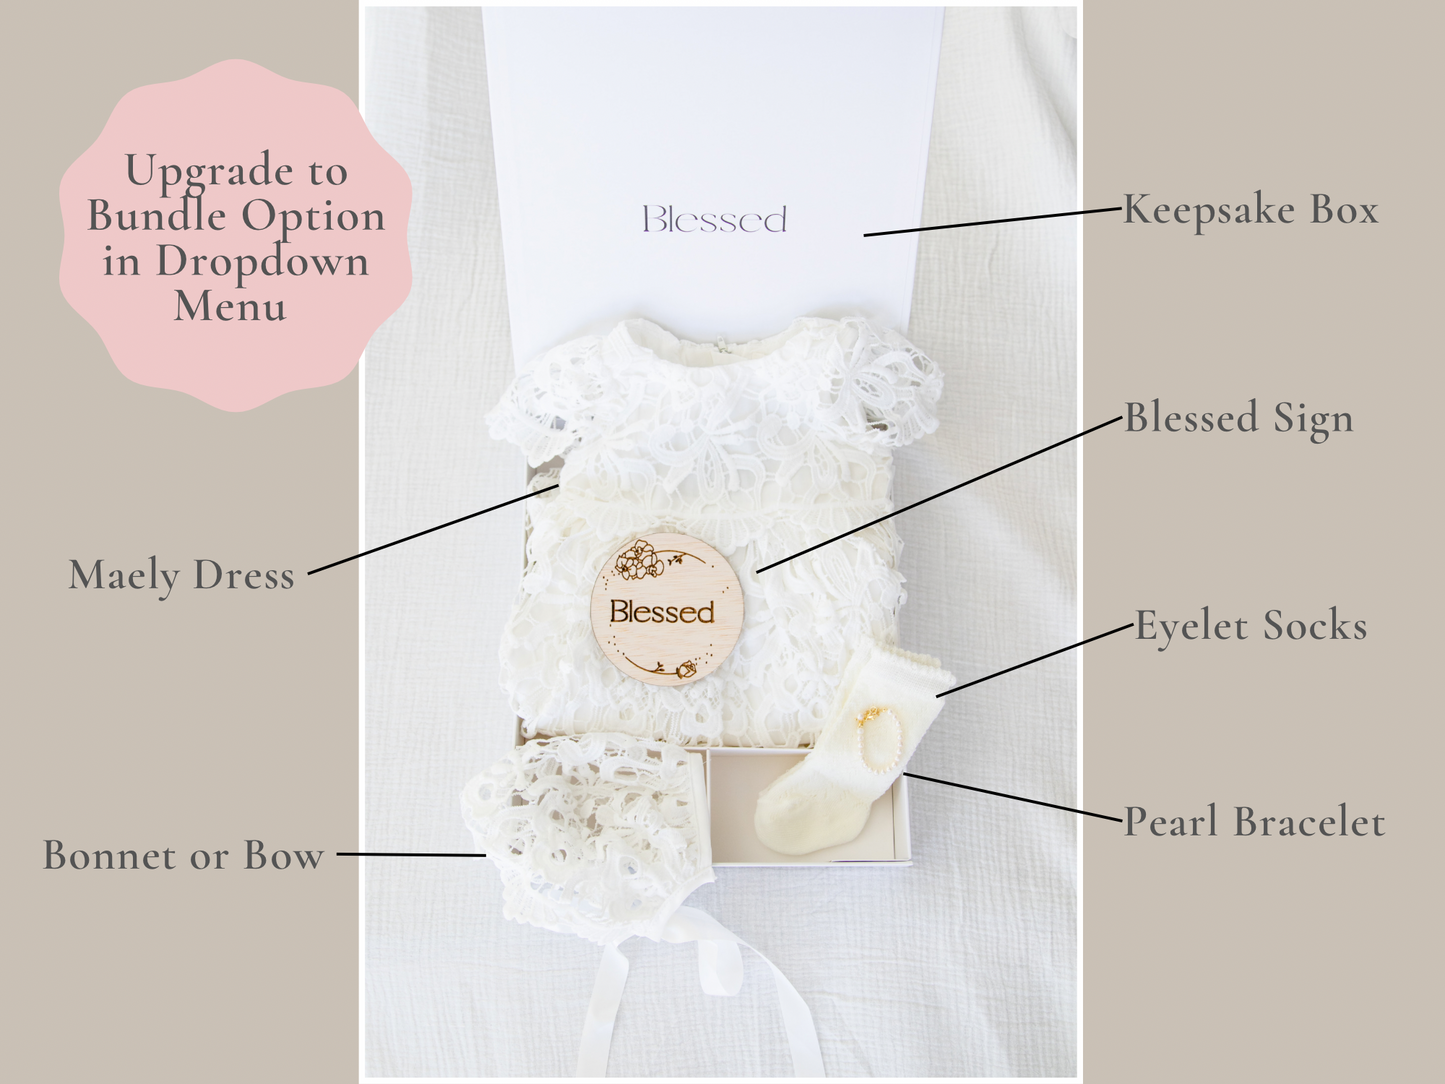 Maely Dress and Bundle Options